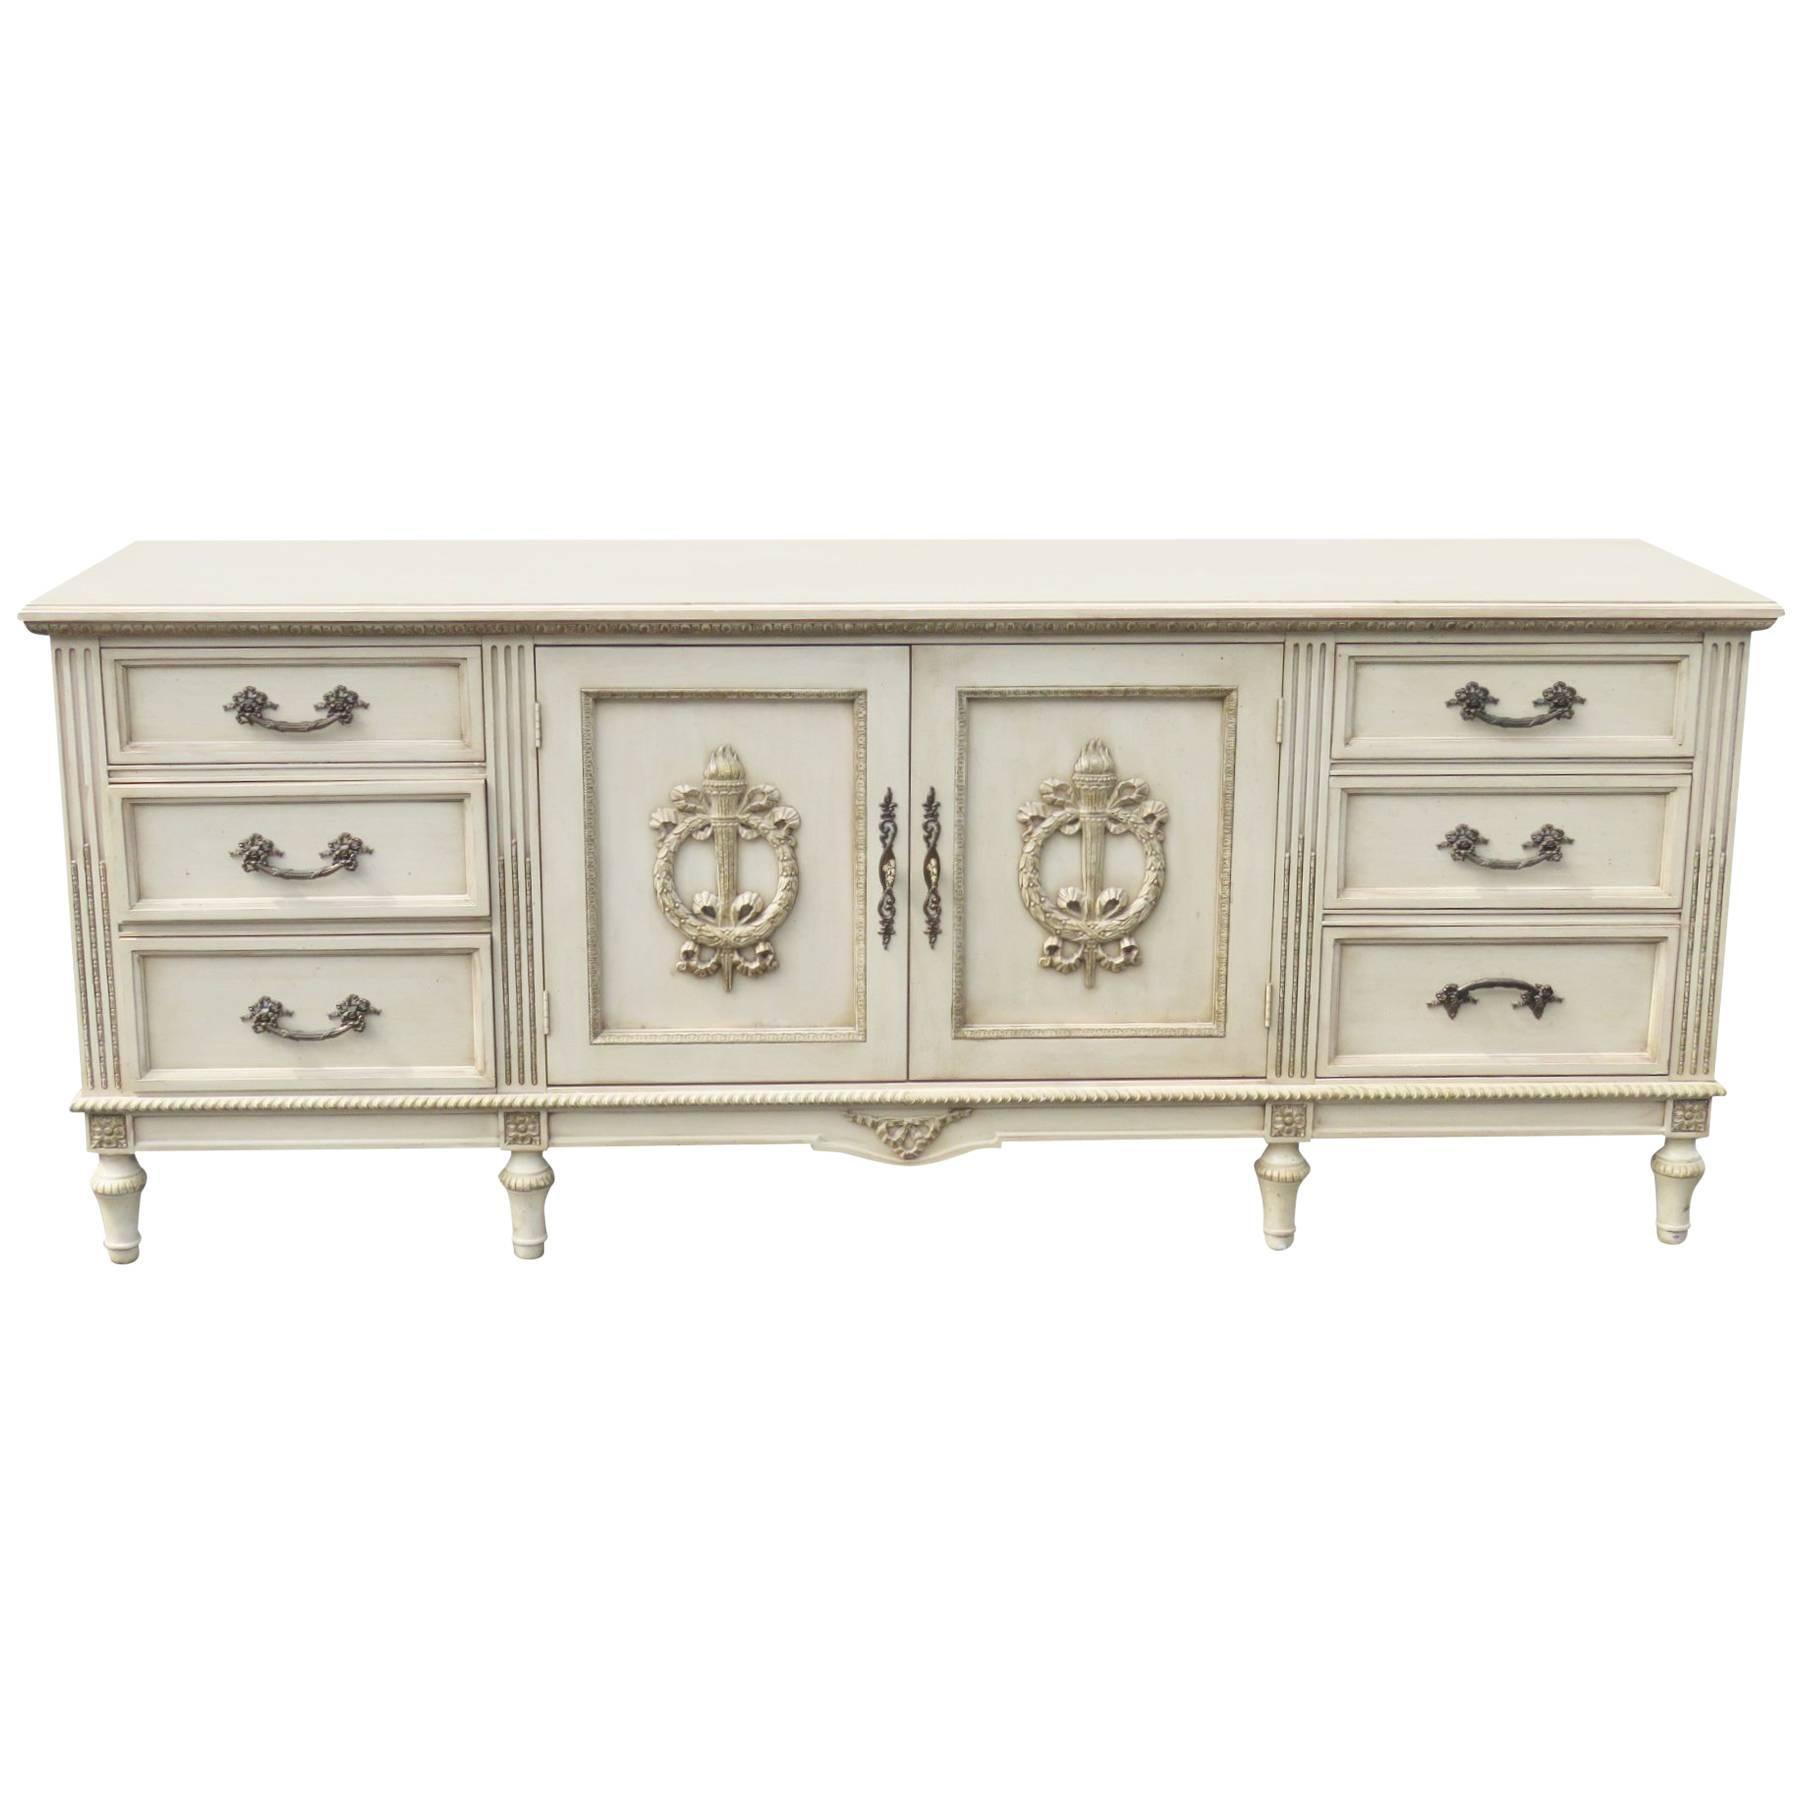 Davis Swedish Style Distressed Cream Painted Carved Sideboard